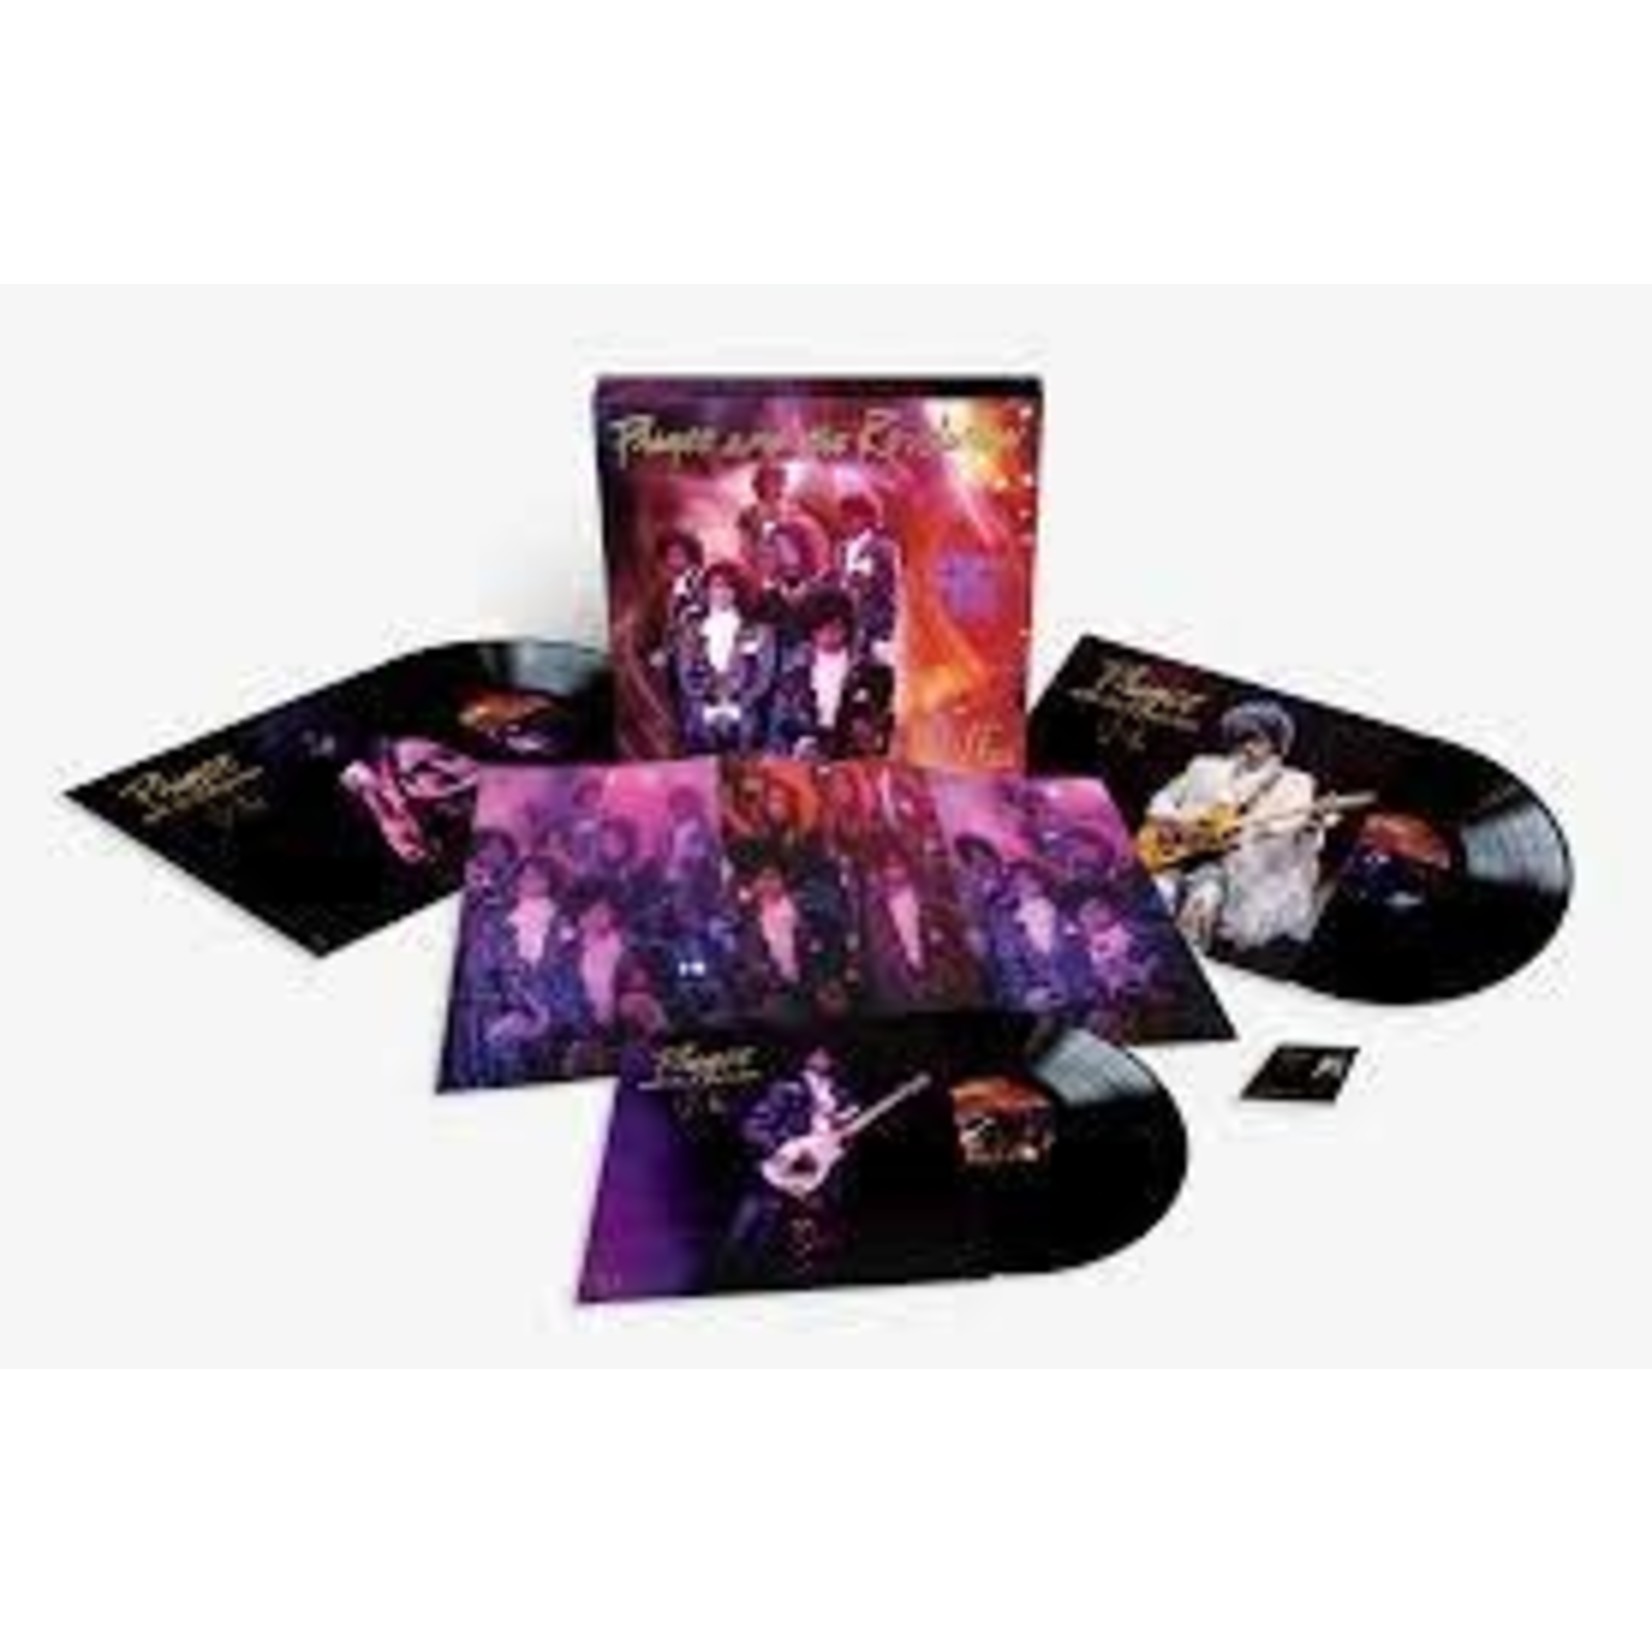 [New] Prince & The Revolution - Live - Syracuse 1985 (3LP, 150g, remixed & remastered)